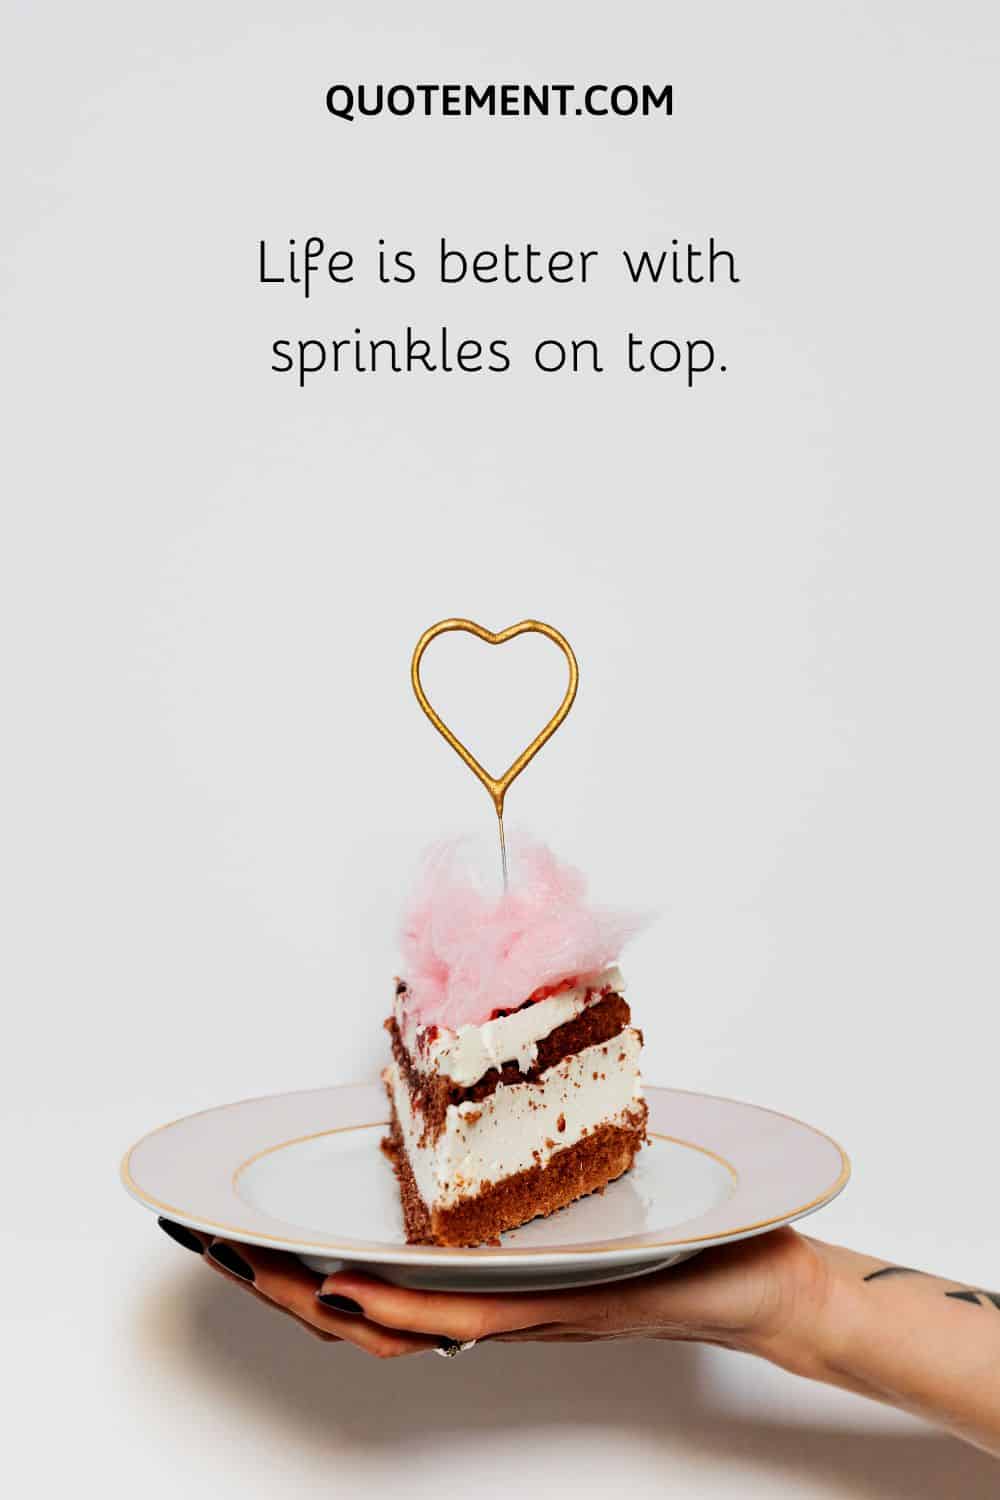 Life is better with sprinkles on top